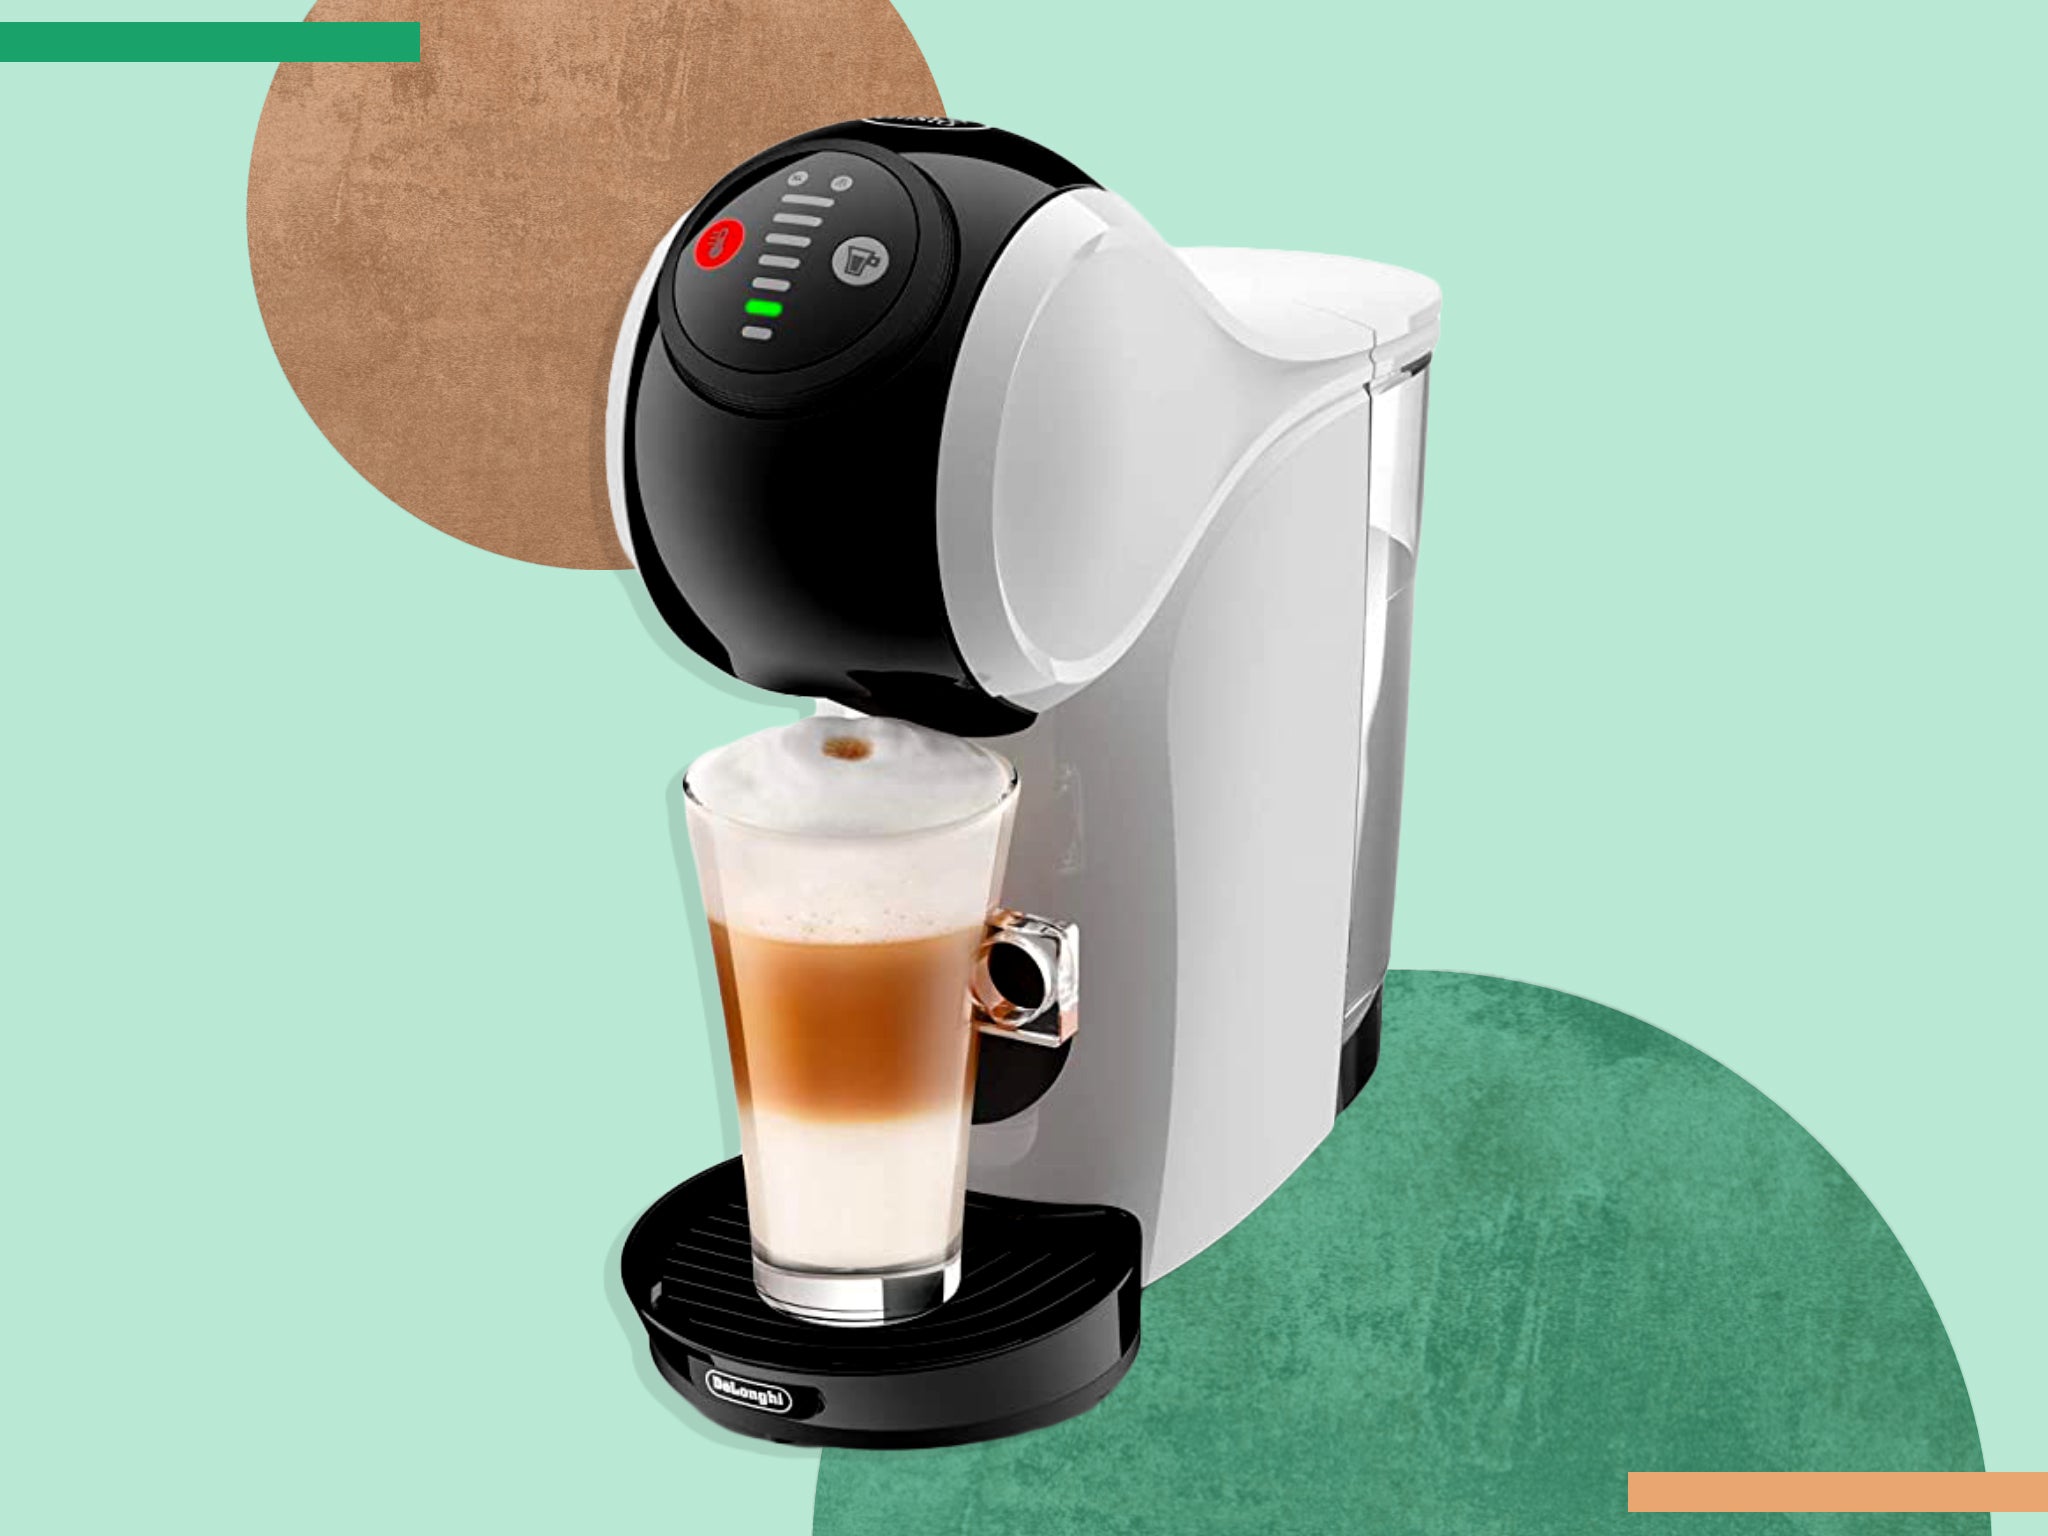 Delonghi dolce gusto genio s review: Does this affordable coffee